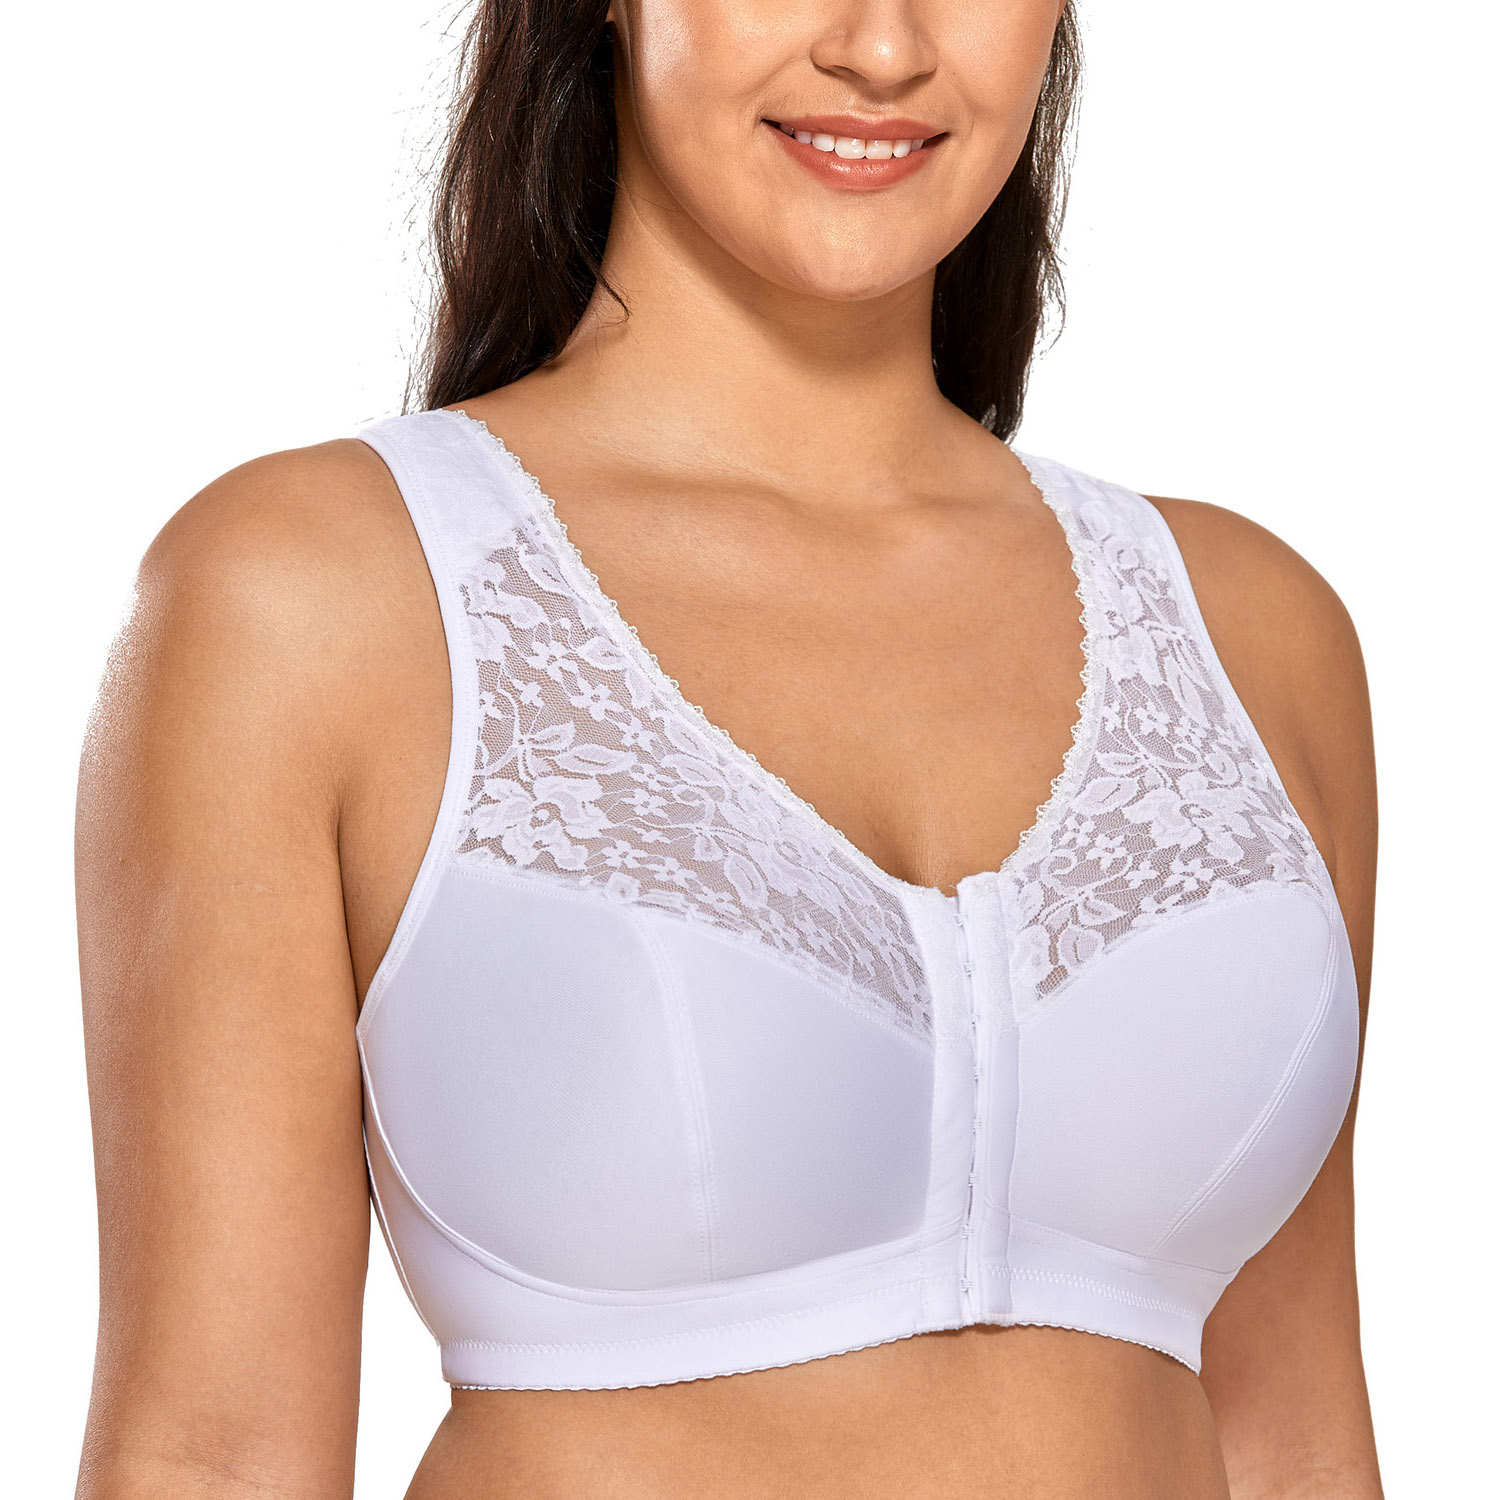 Buy Delimira Women's Front Closure Full Coverage Wirefree